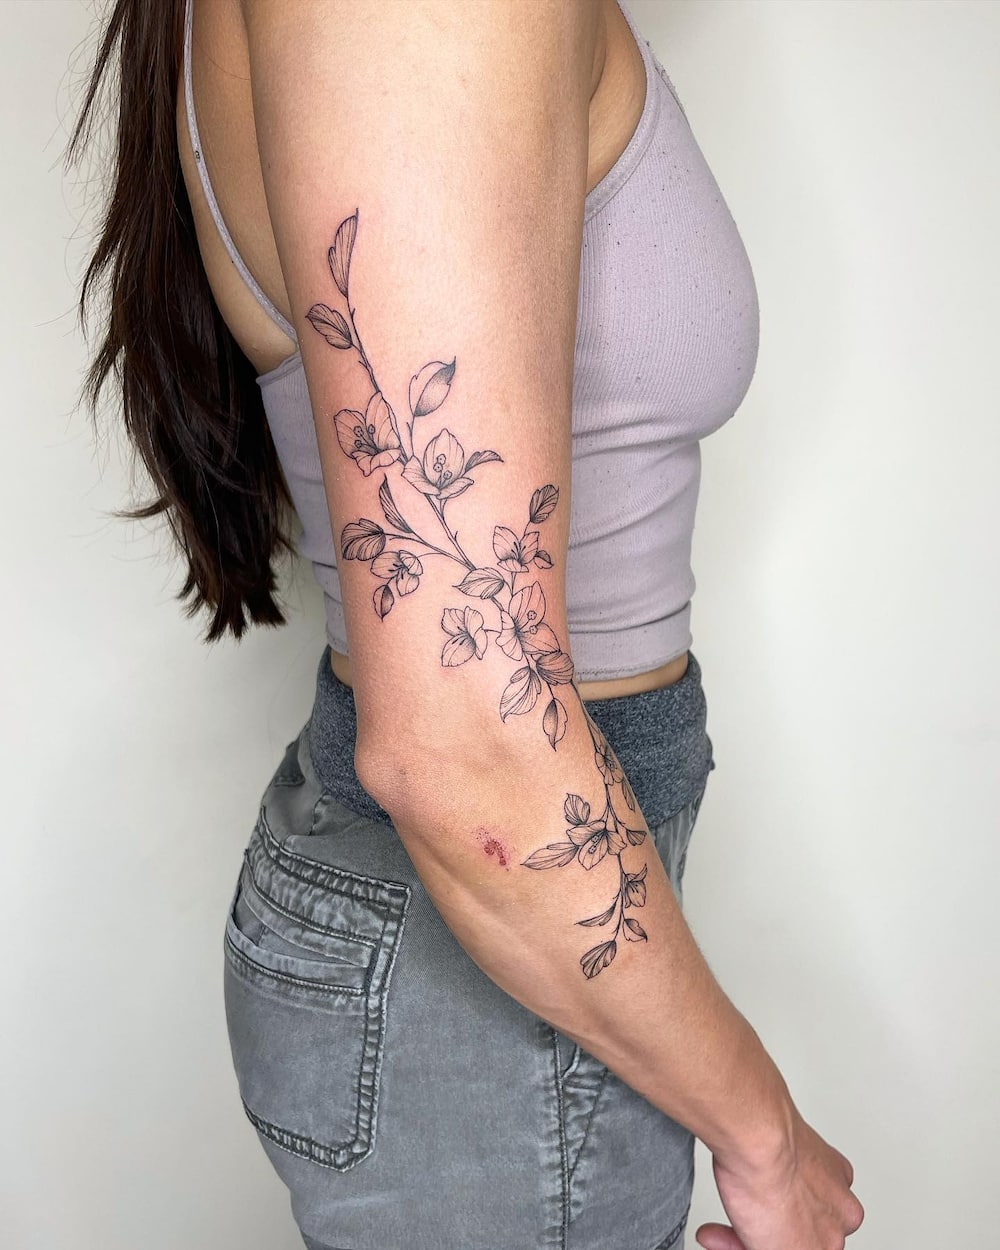 Woman with Bougainvillea floral wrap tattoo on arm